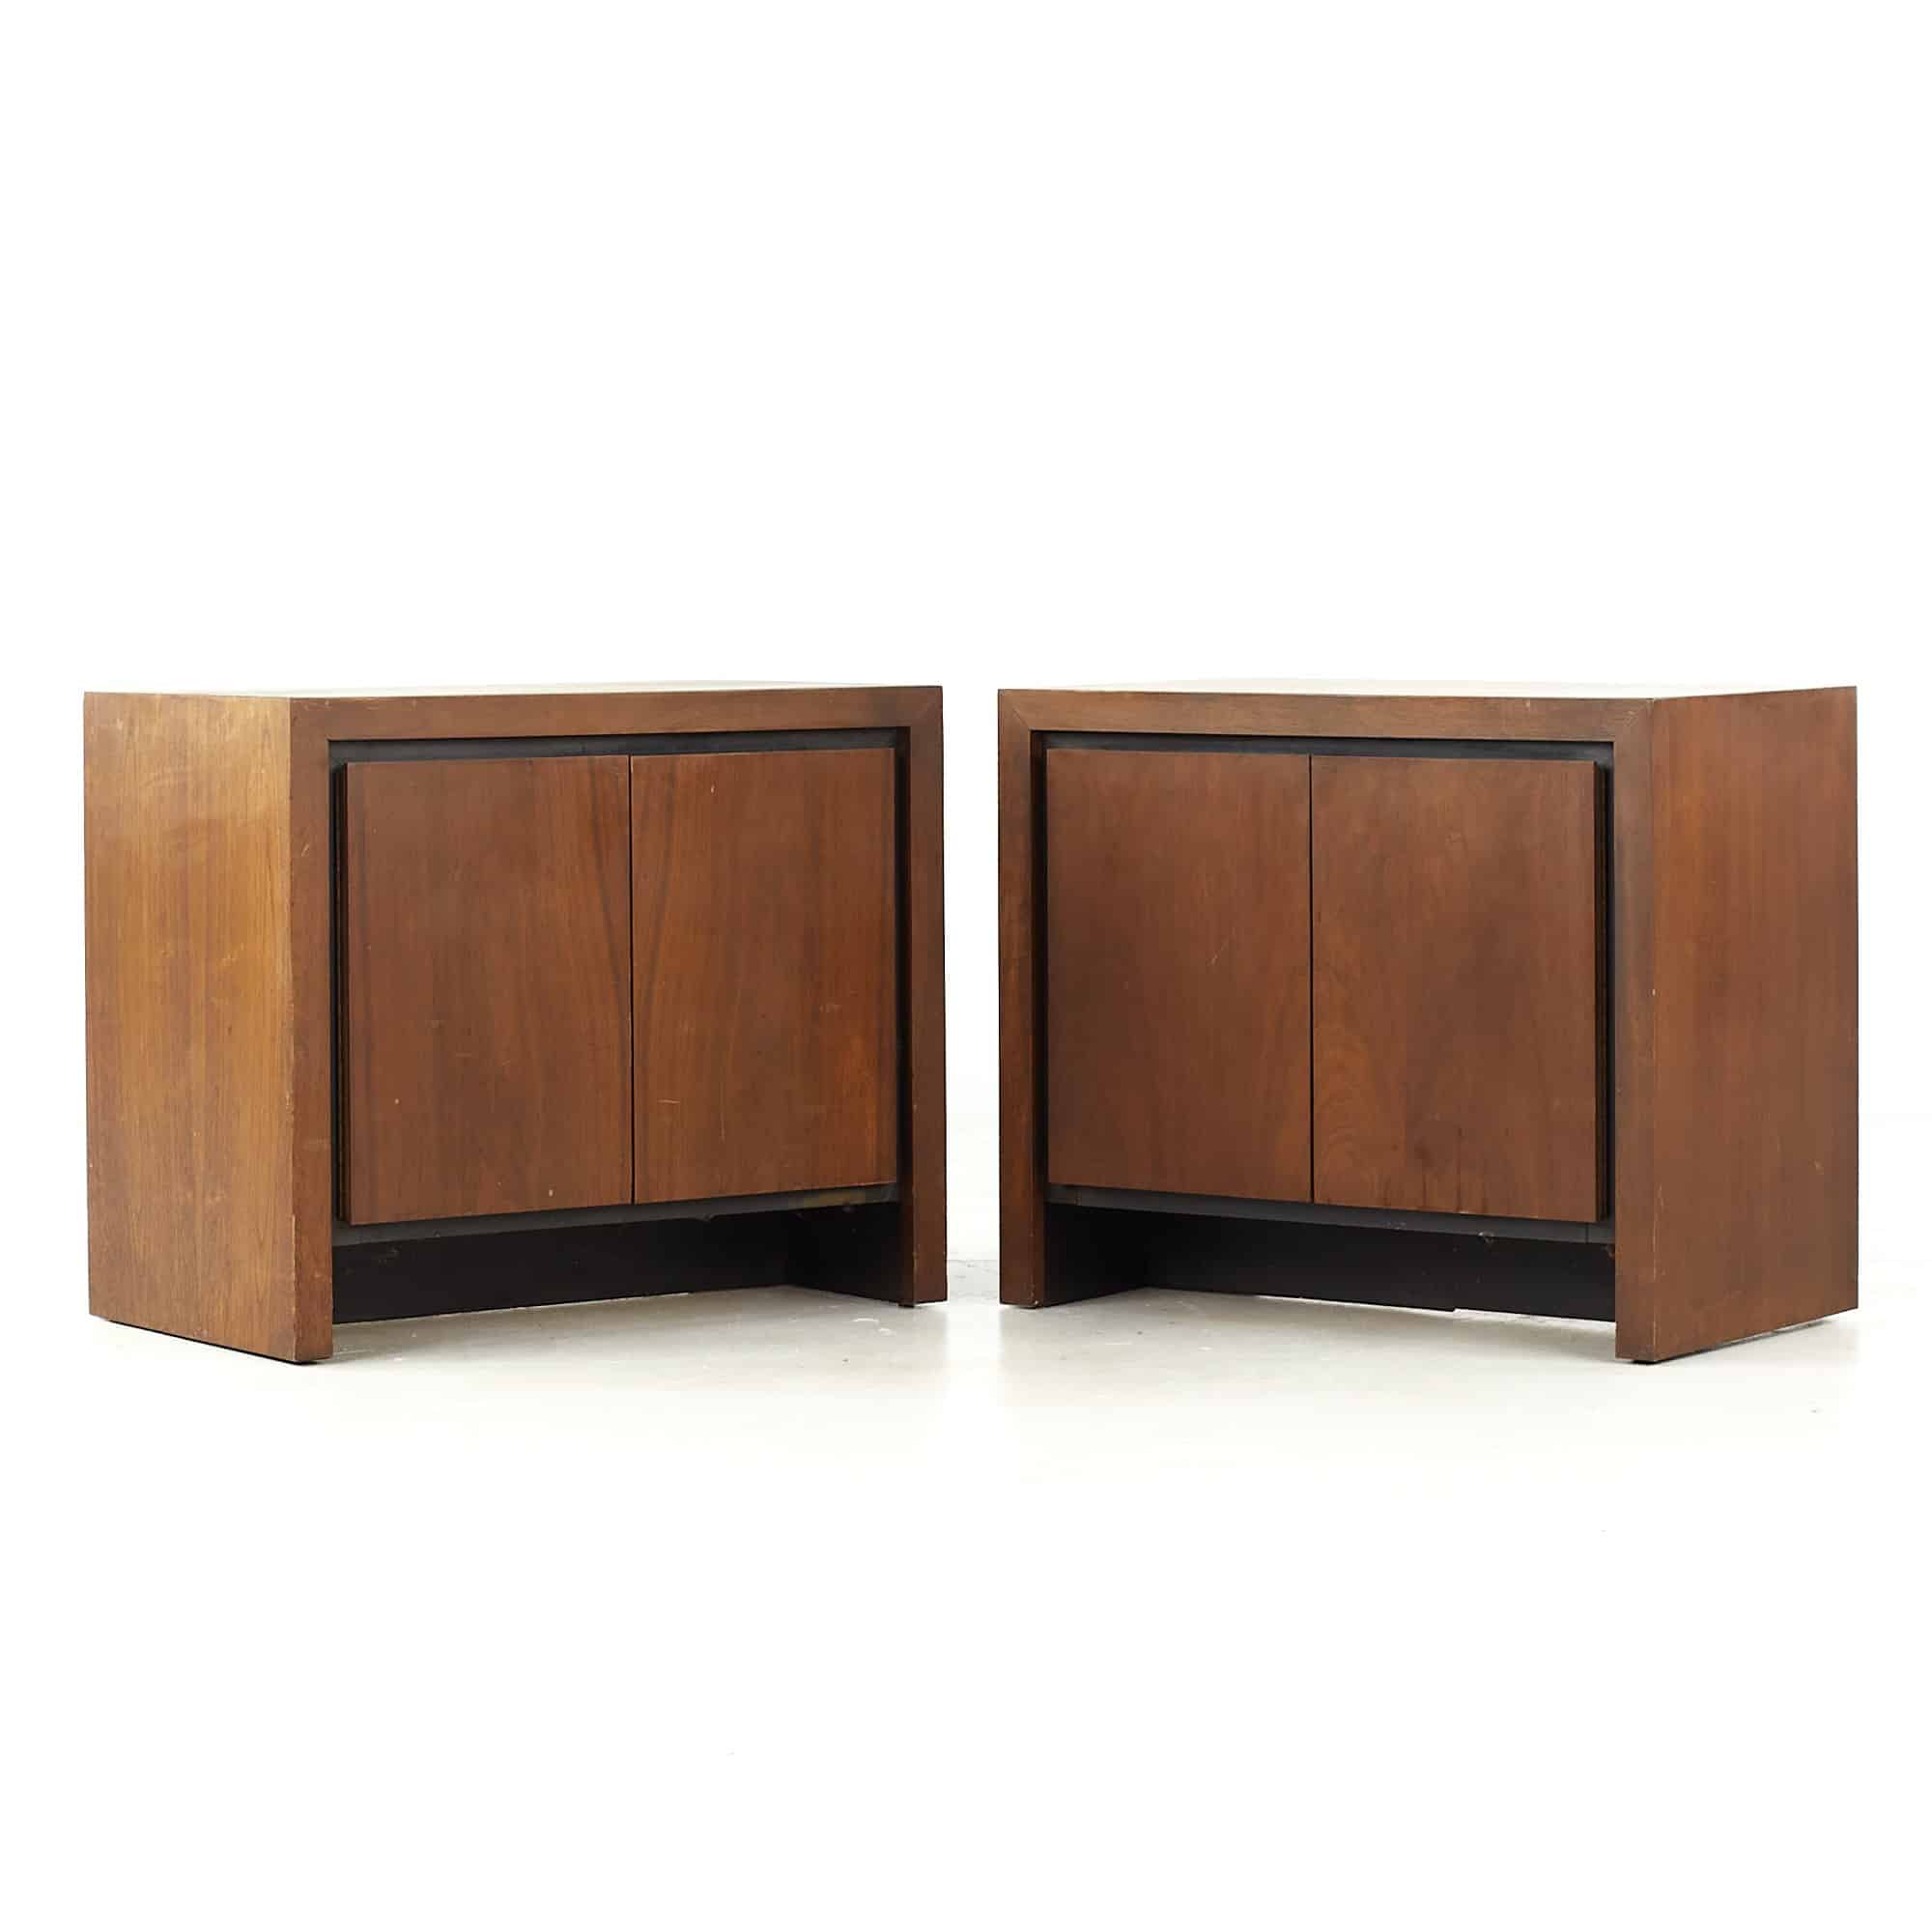 Dillingham Mid Century Bookmatched Nightstands - Pair